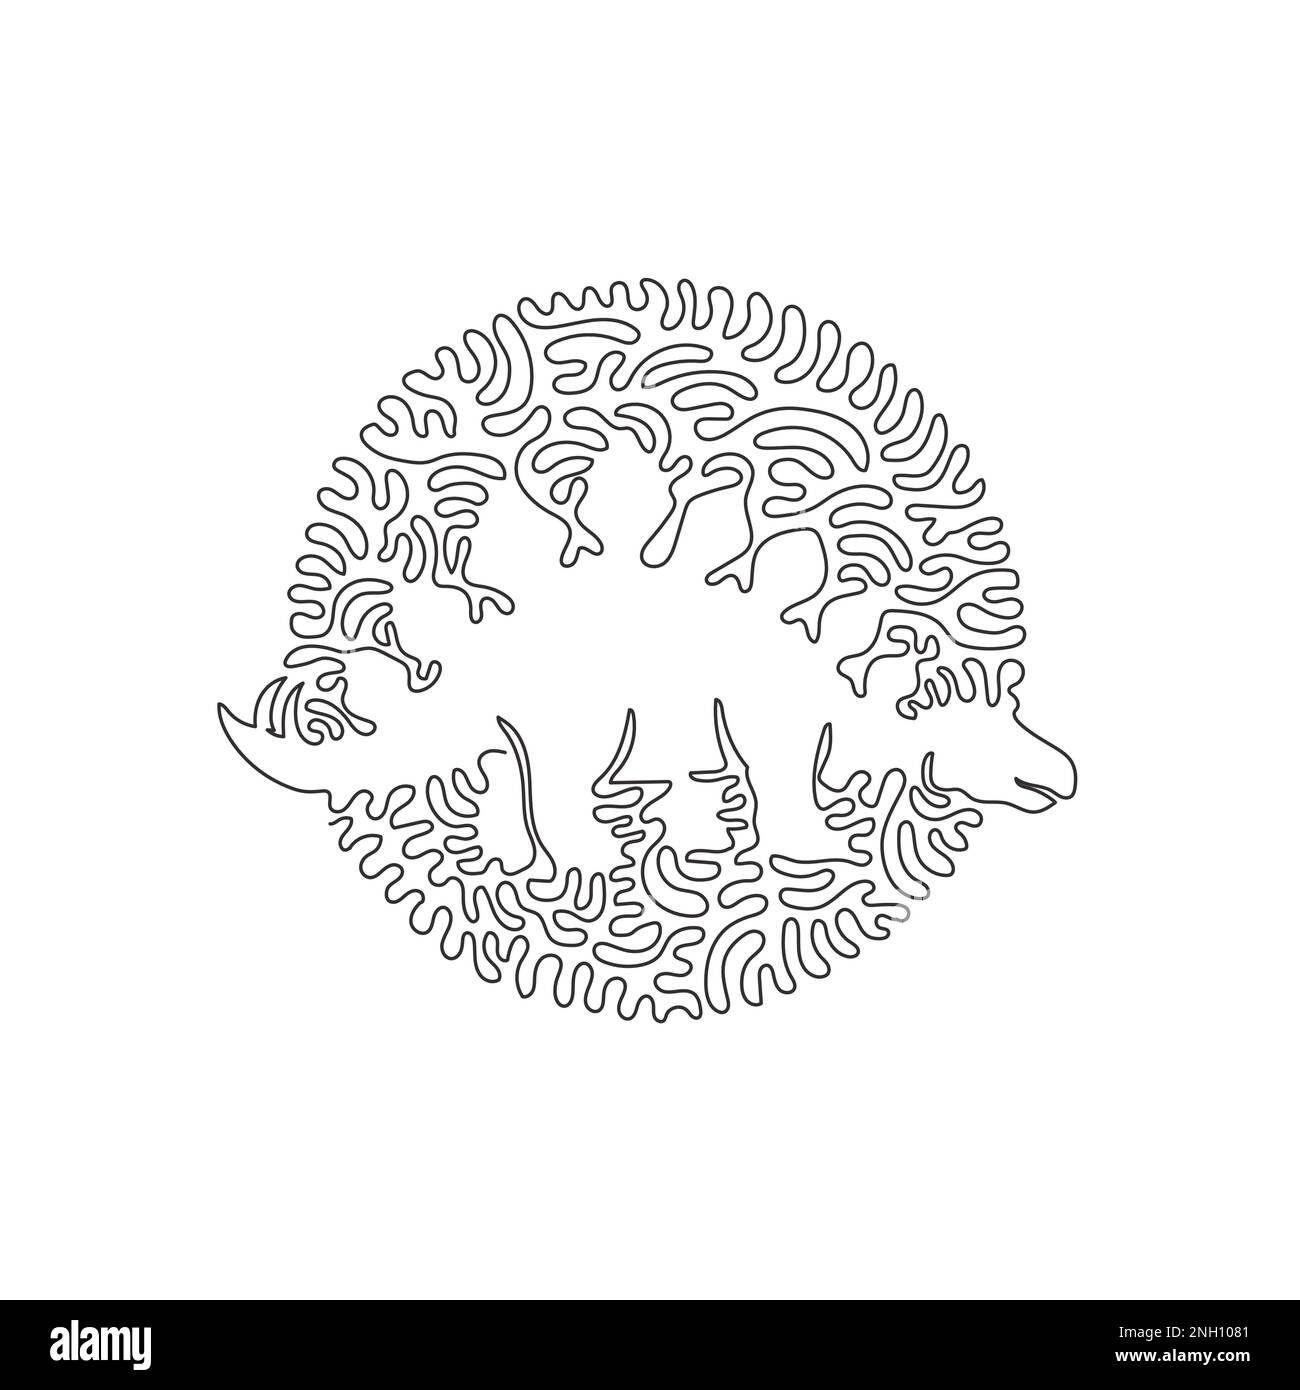 Continuous one line drawing of roof lizard abstract art. Single line editable stroke vector illustration of kite-shaped plate of the back and tail Stock Vector